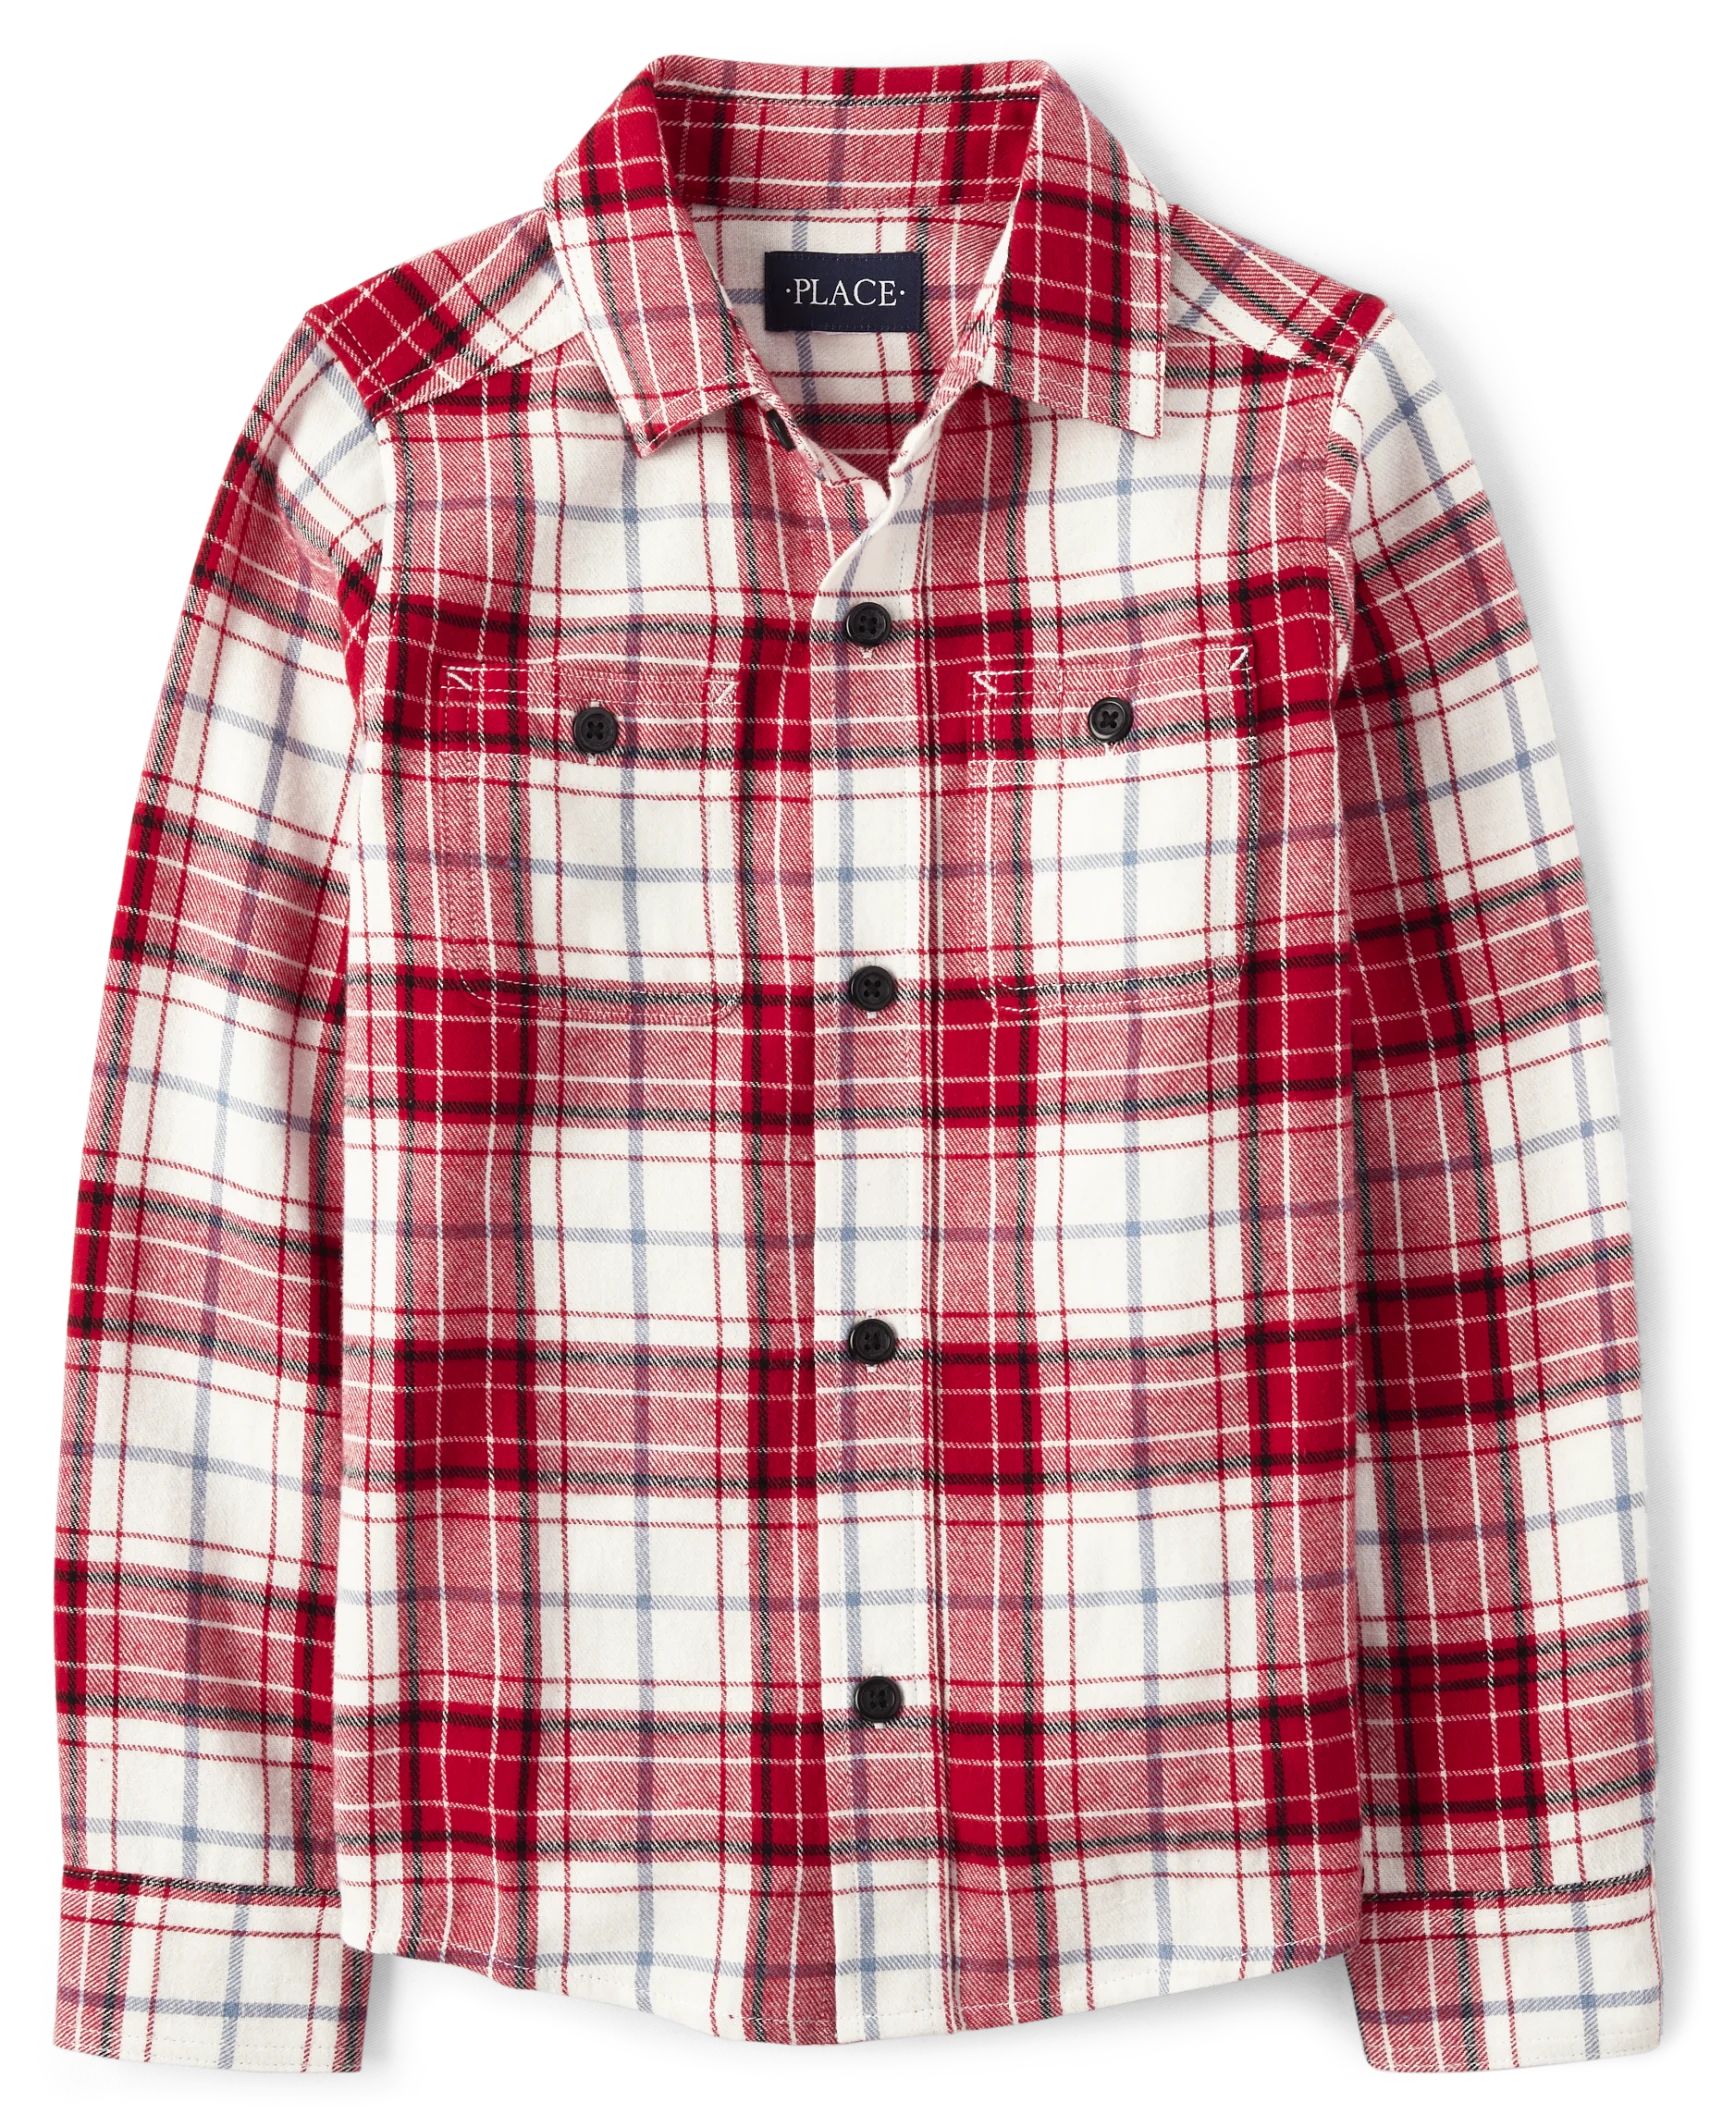 Boys Long Sleeve Christmas Plaid Flannel Button Up Shirt | The Children's Place  - CLASSICRED | The Children's Place